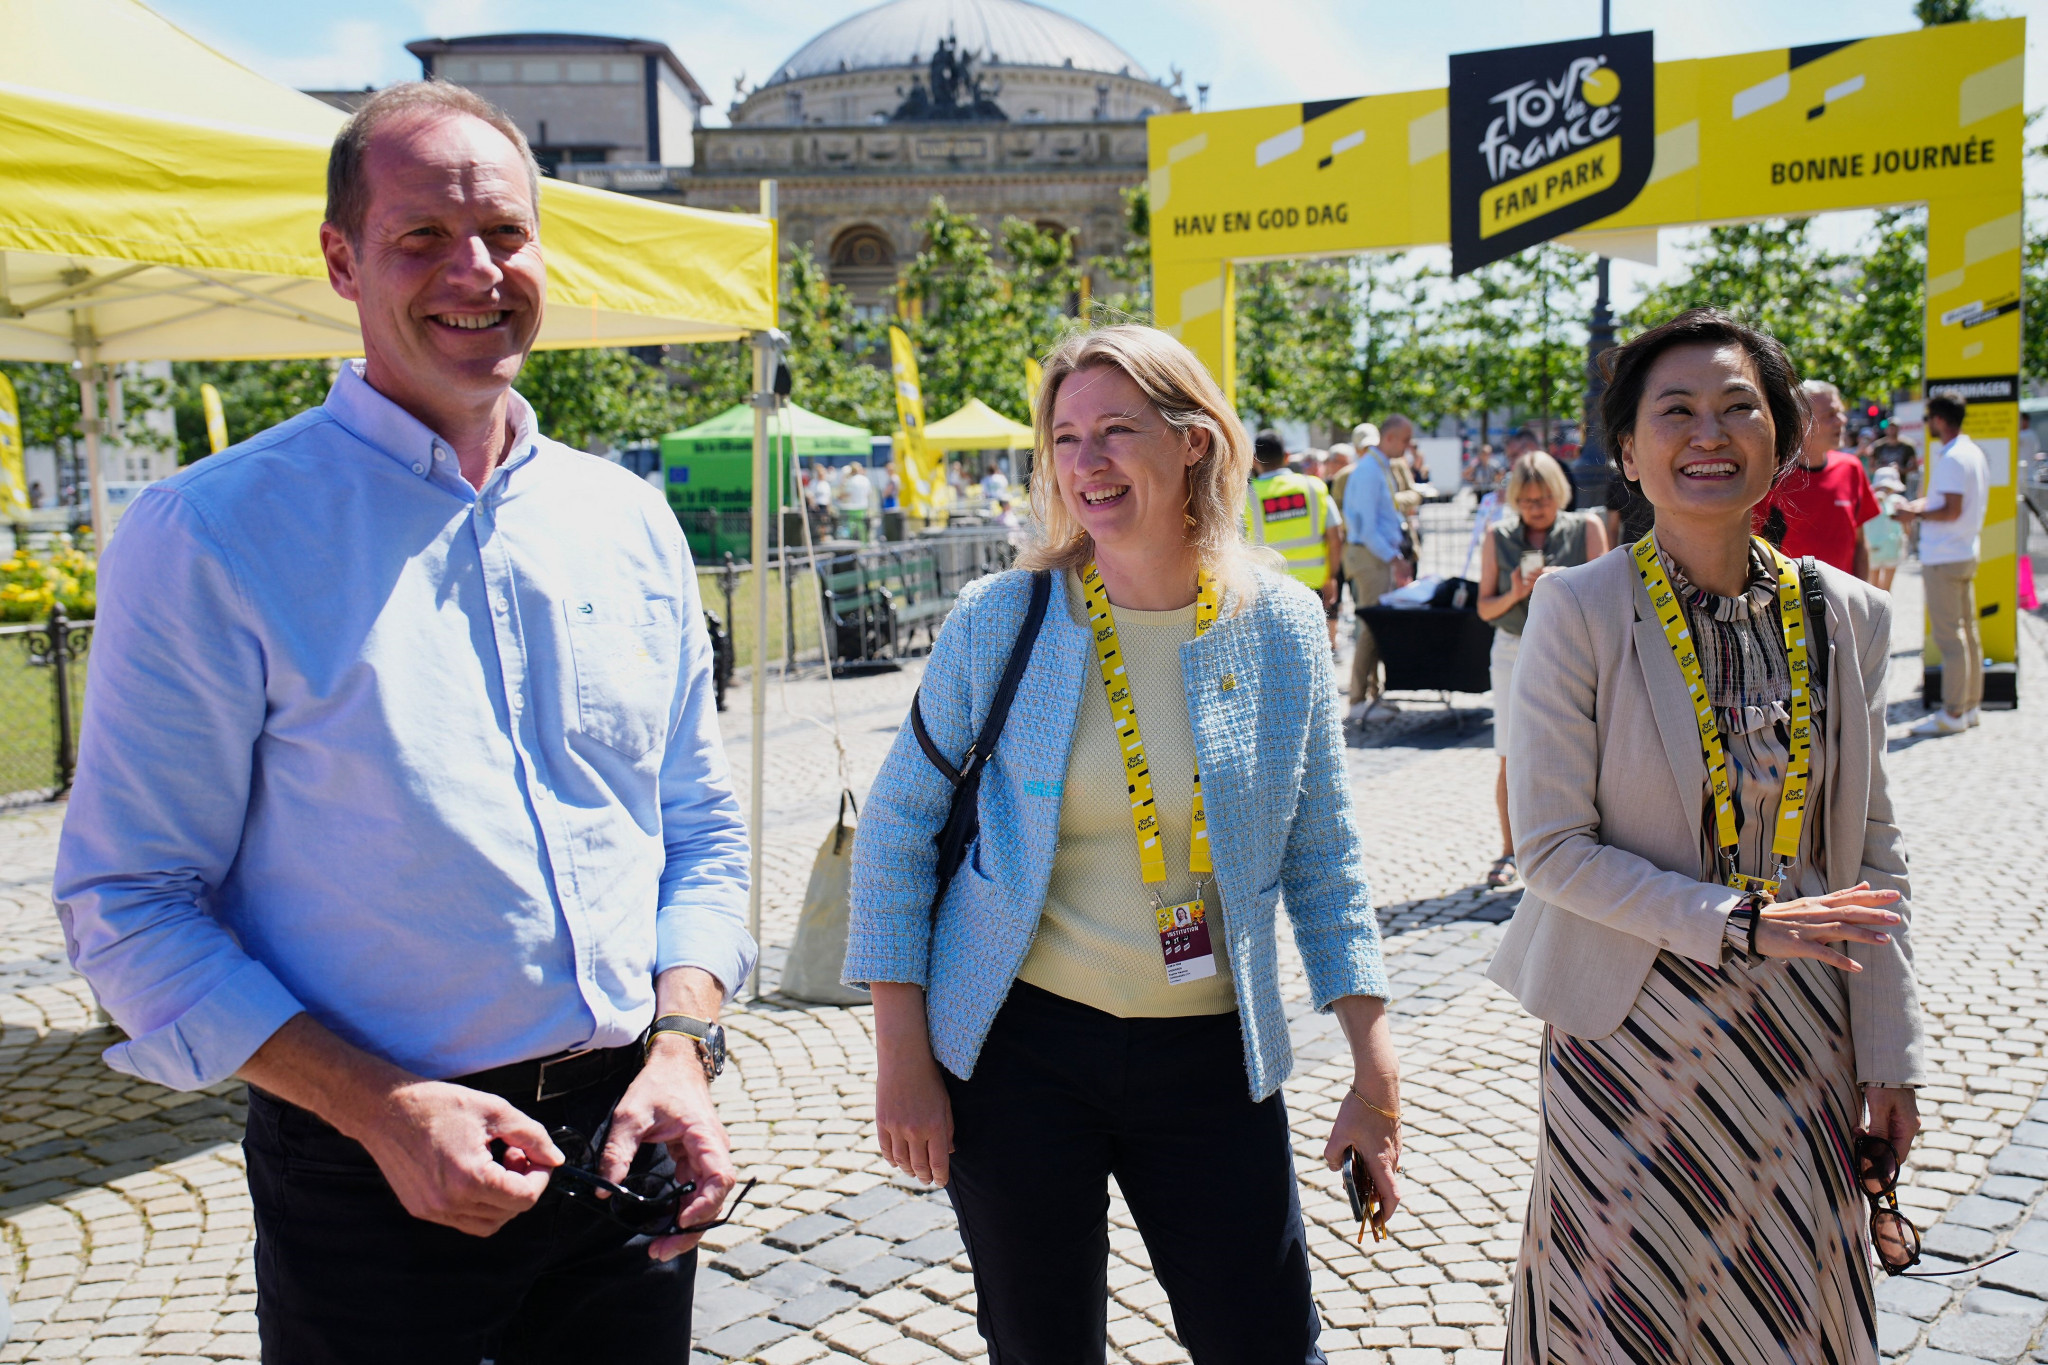 Tour de France general director Christian Prudhomme, left, and Lord Mayor of Copenhagen Sophie Hæstorp Andersen, centre, have high hopes for the Grand Départ which is due to start on Friday ©Getty Images